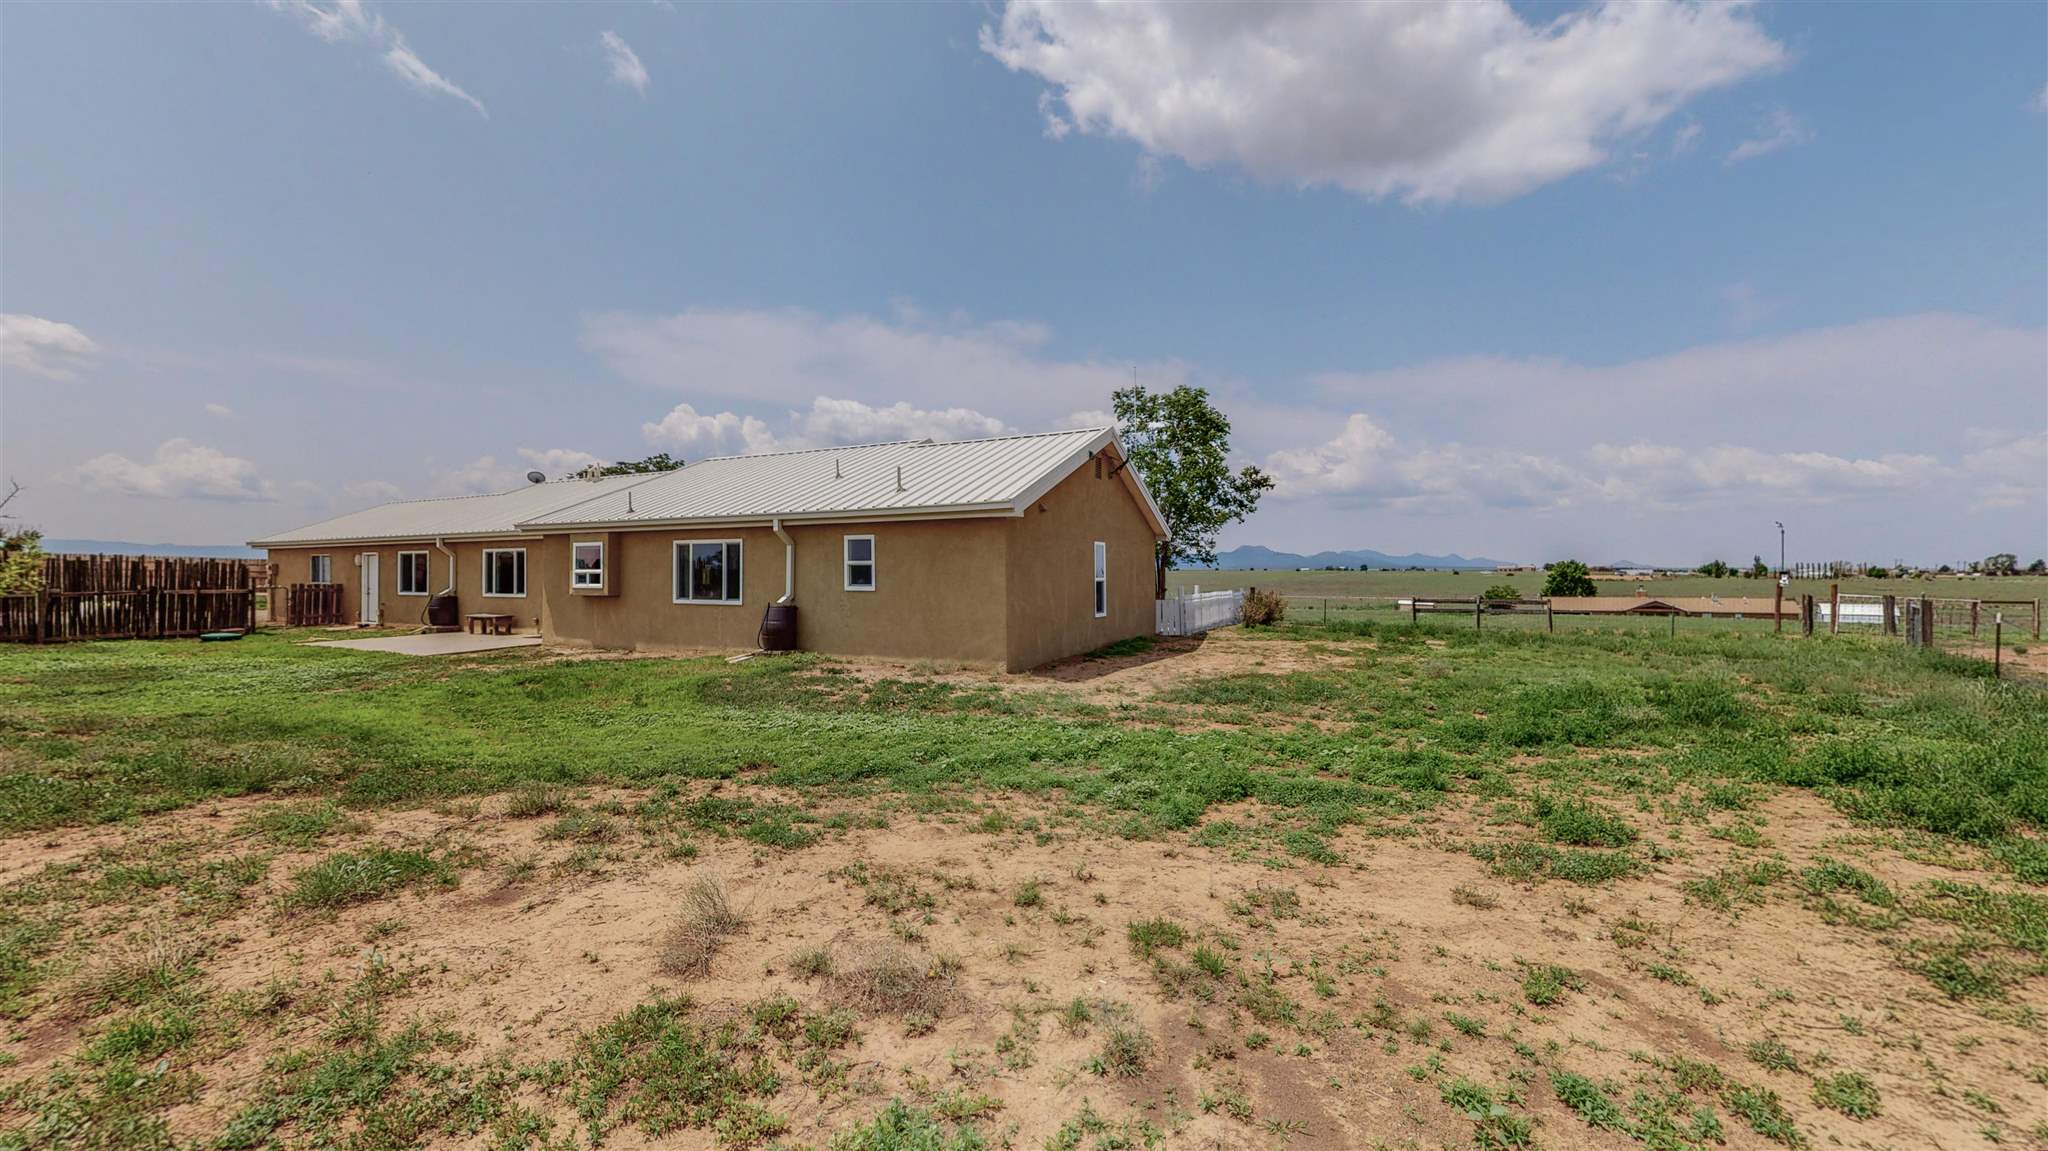 18 Caballo, Stanley, New Mexico 87056, 4 Bedrooms Bedrooms, ,2 BathroomsBathrooms,Residential,For Sale,18 Caballo,202103200